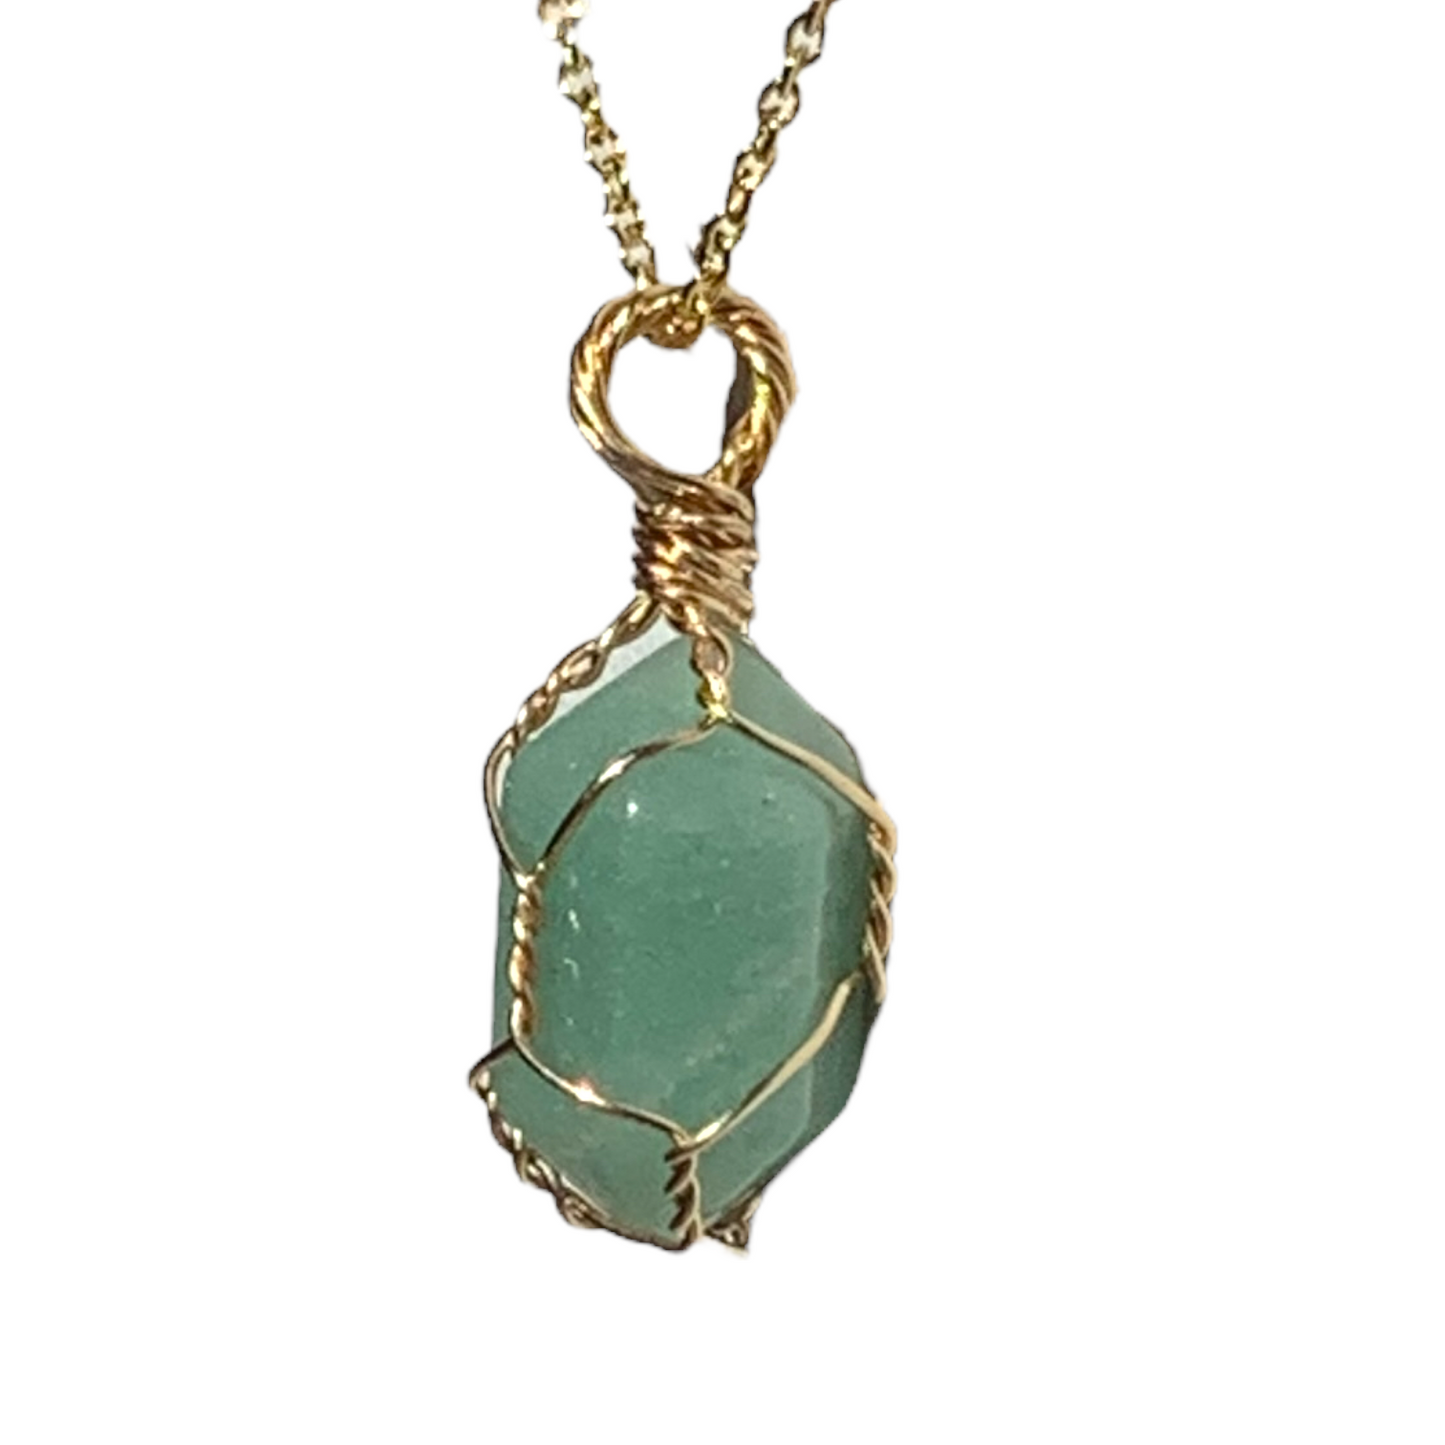 Sterling Silver | 14KT Gold Filled Mini Cage Fluorite Crystal Pendant